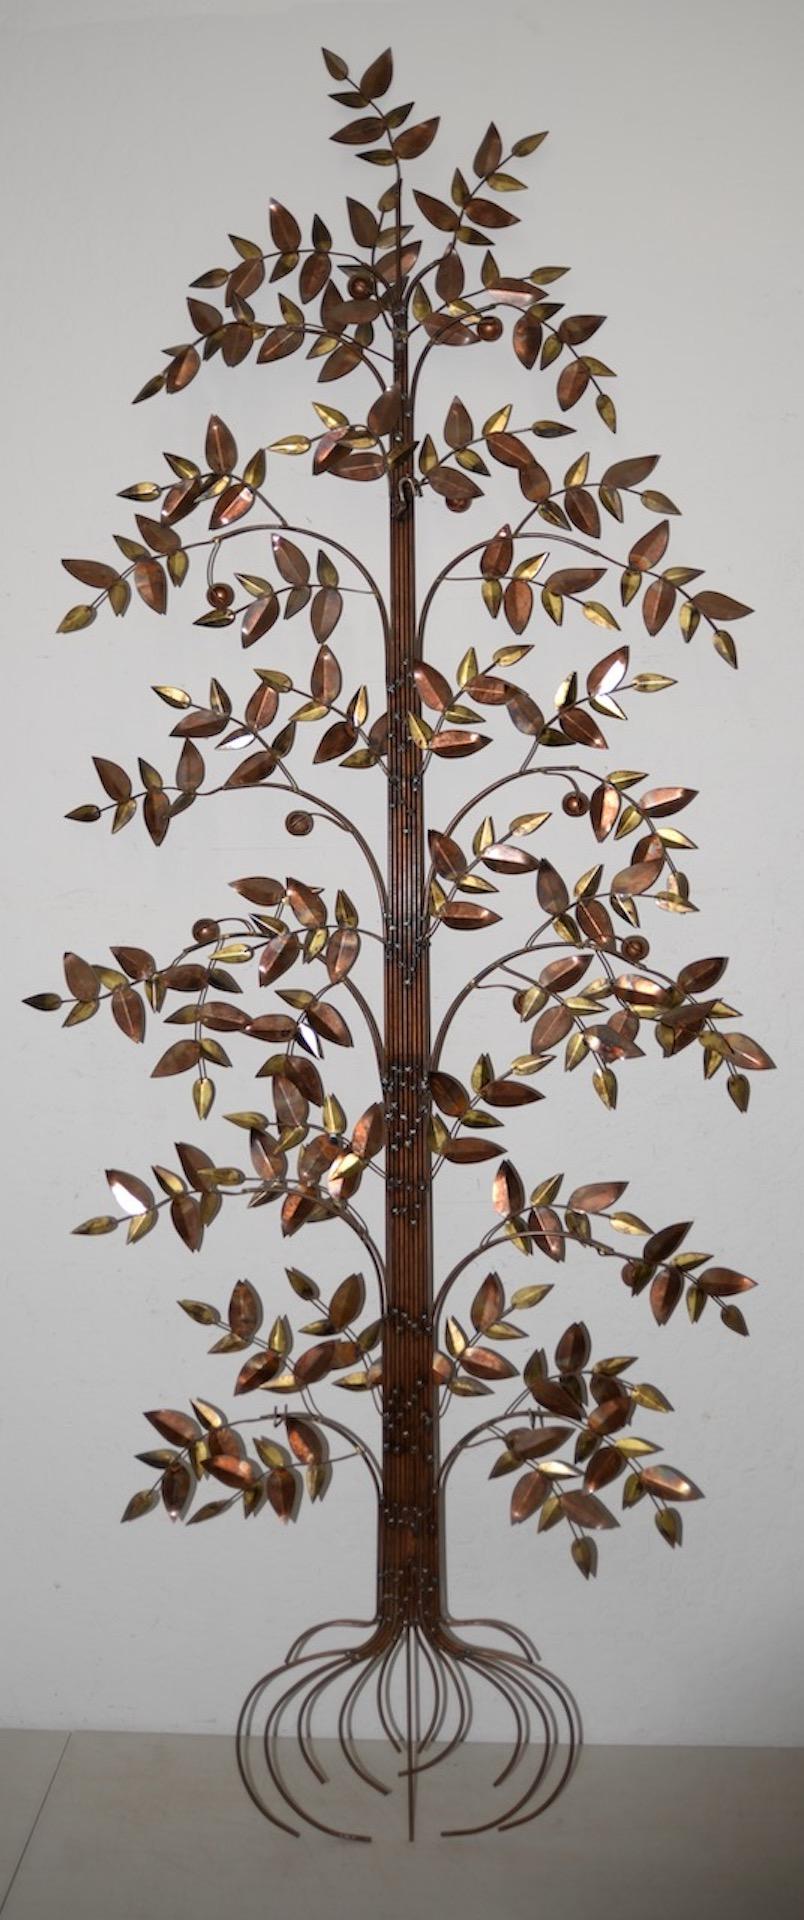 Curtis Jere Copper Toned Metal Tree Sculpture c.1970s

Tall and elegant tree sculpture by listed American artist Curtis Jere.

The tree is made from copper toned metal and is in excellent vintage condition.

The sculpture measures 31